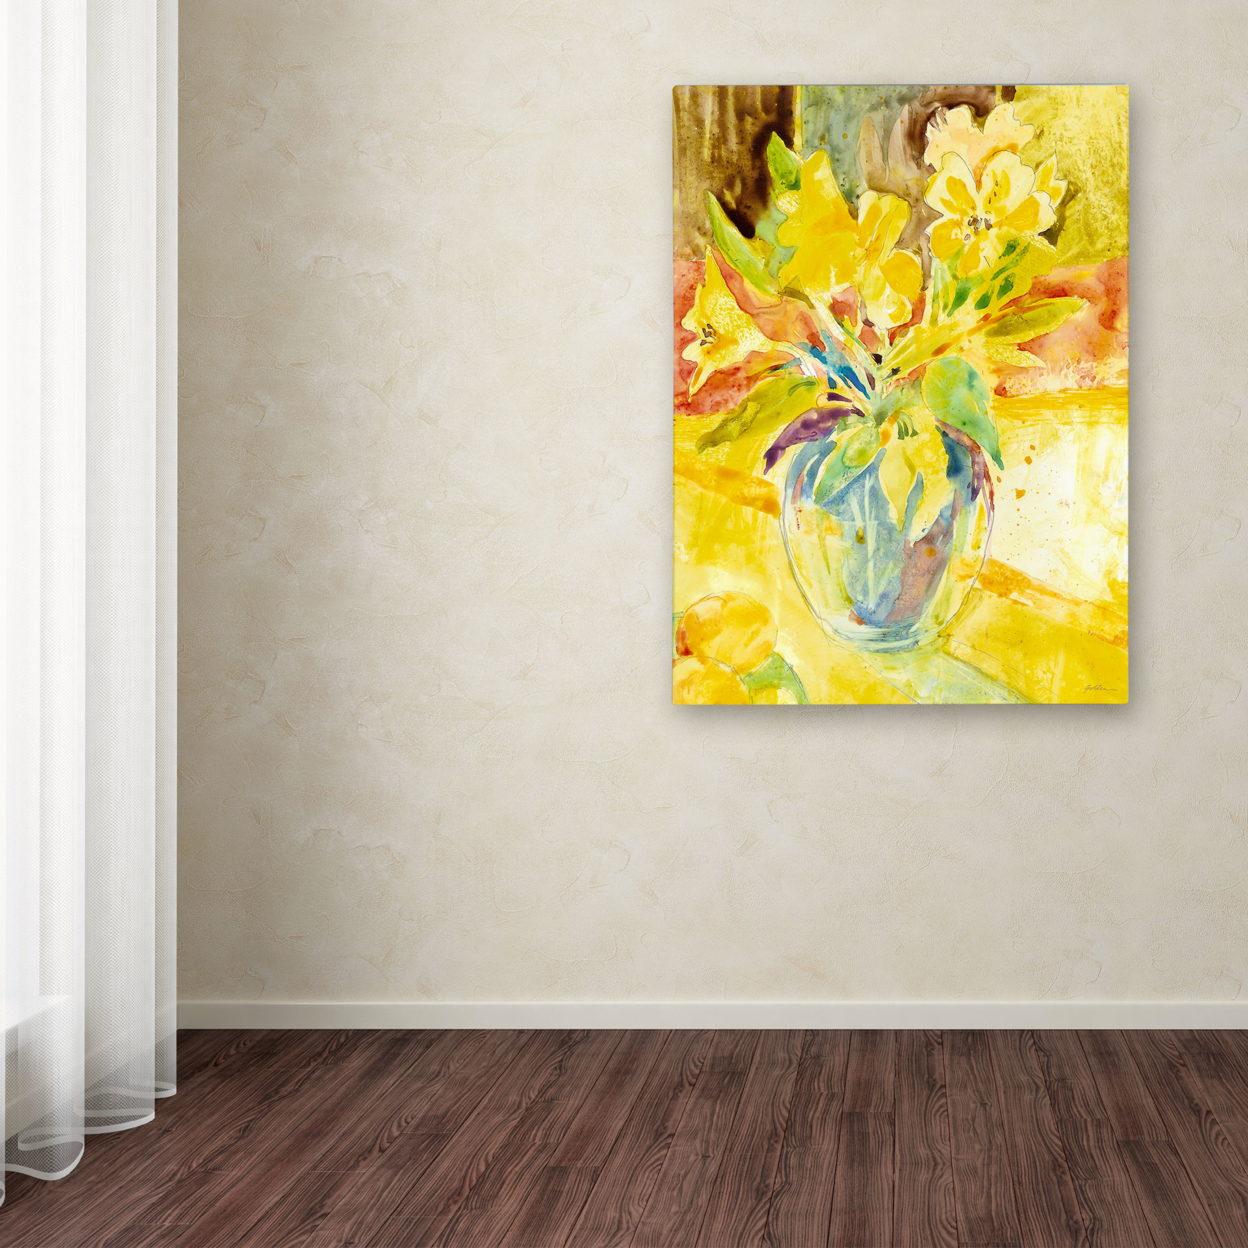 Sheila Golden 'Vase With Yellow Flowers' Canvas Wall Art 35 X 47 Inches